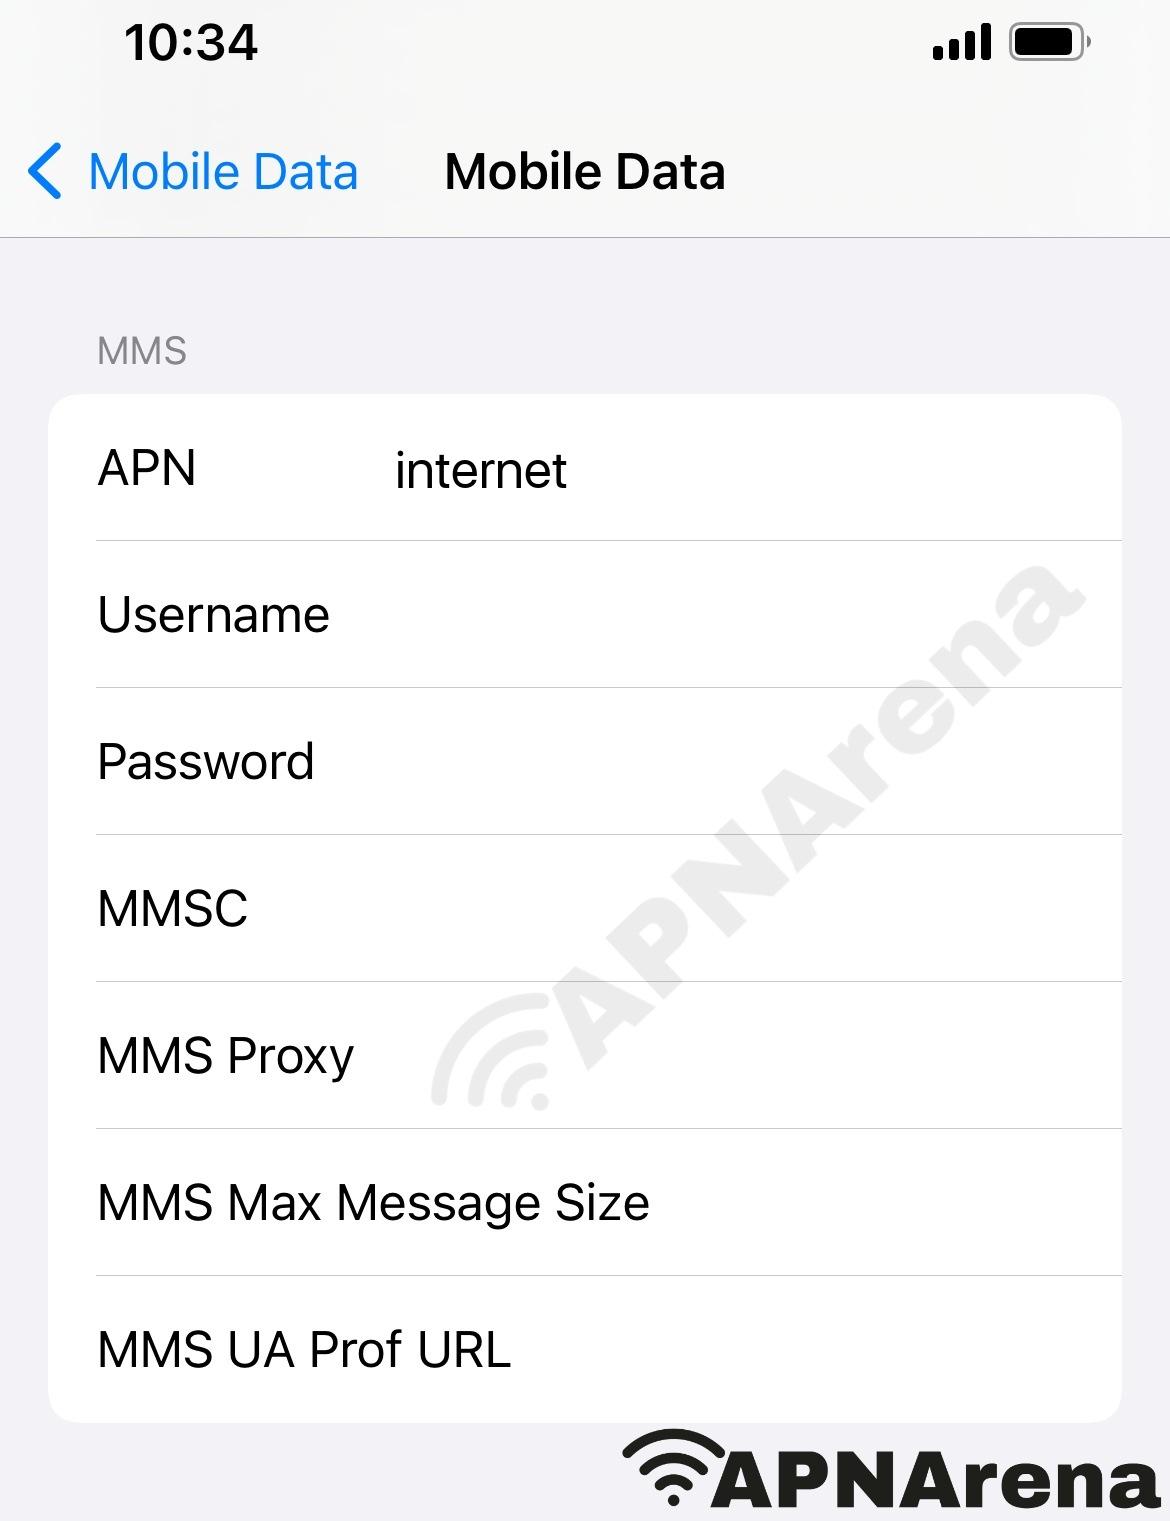 Our Telecom MMS Settings for iPhone